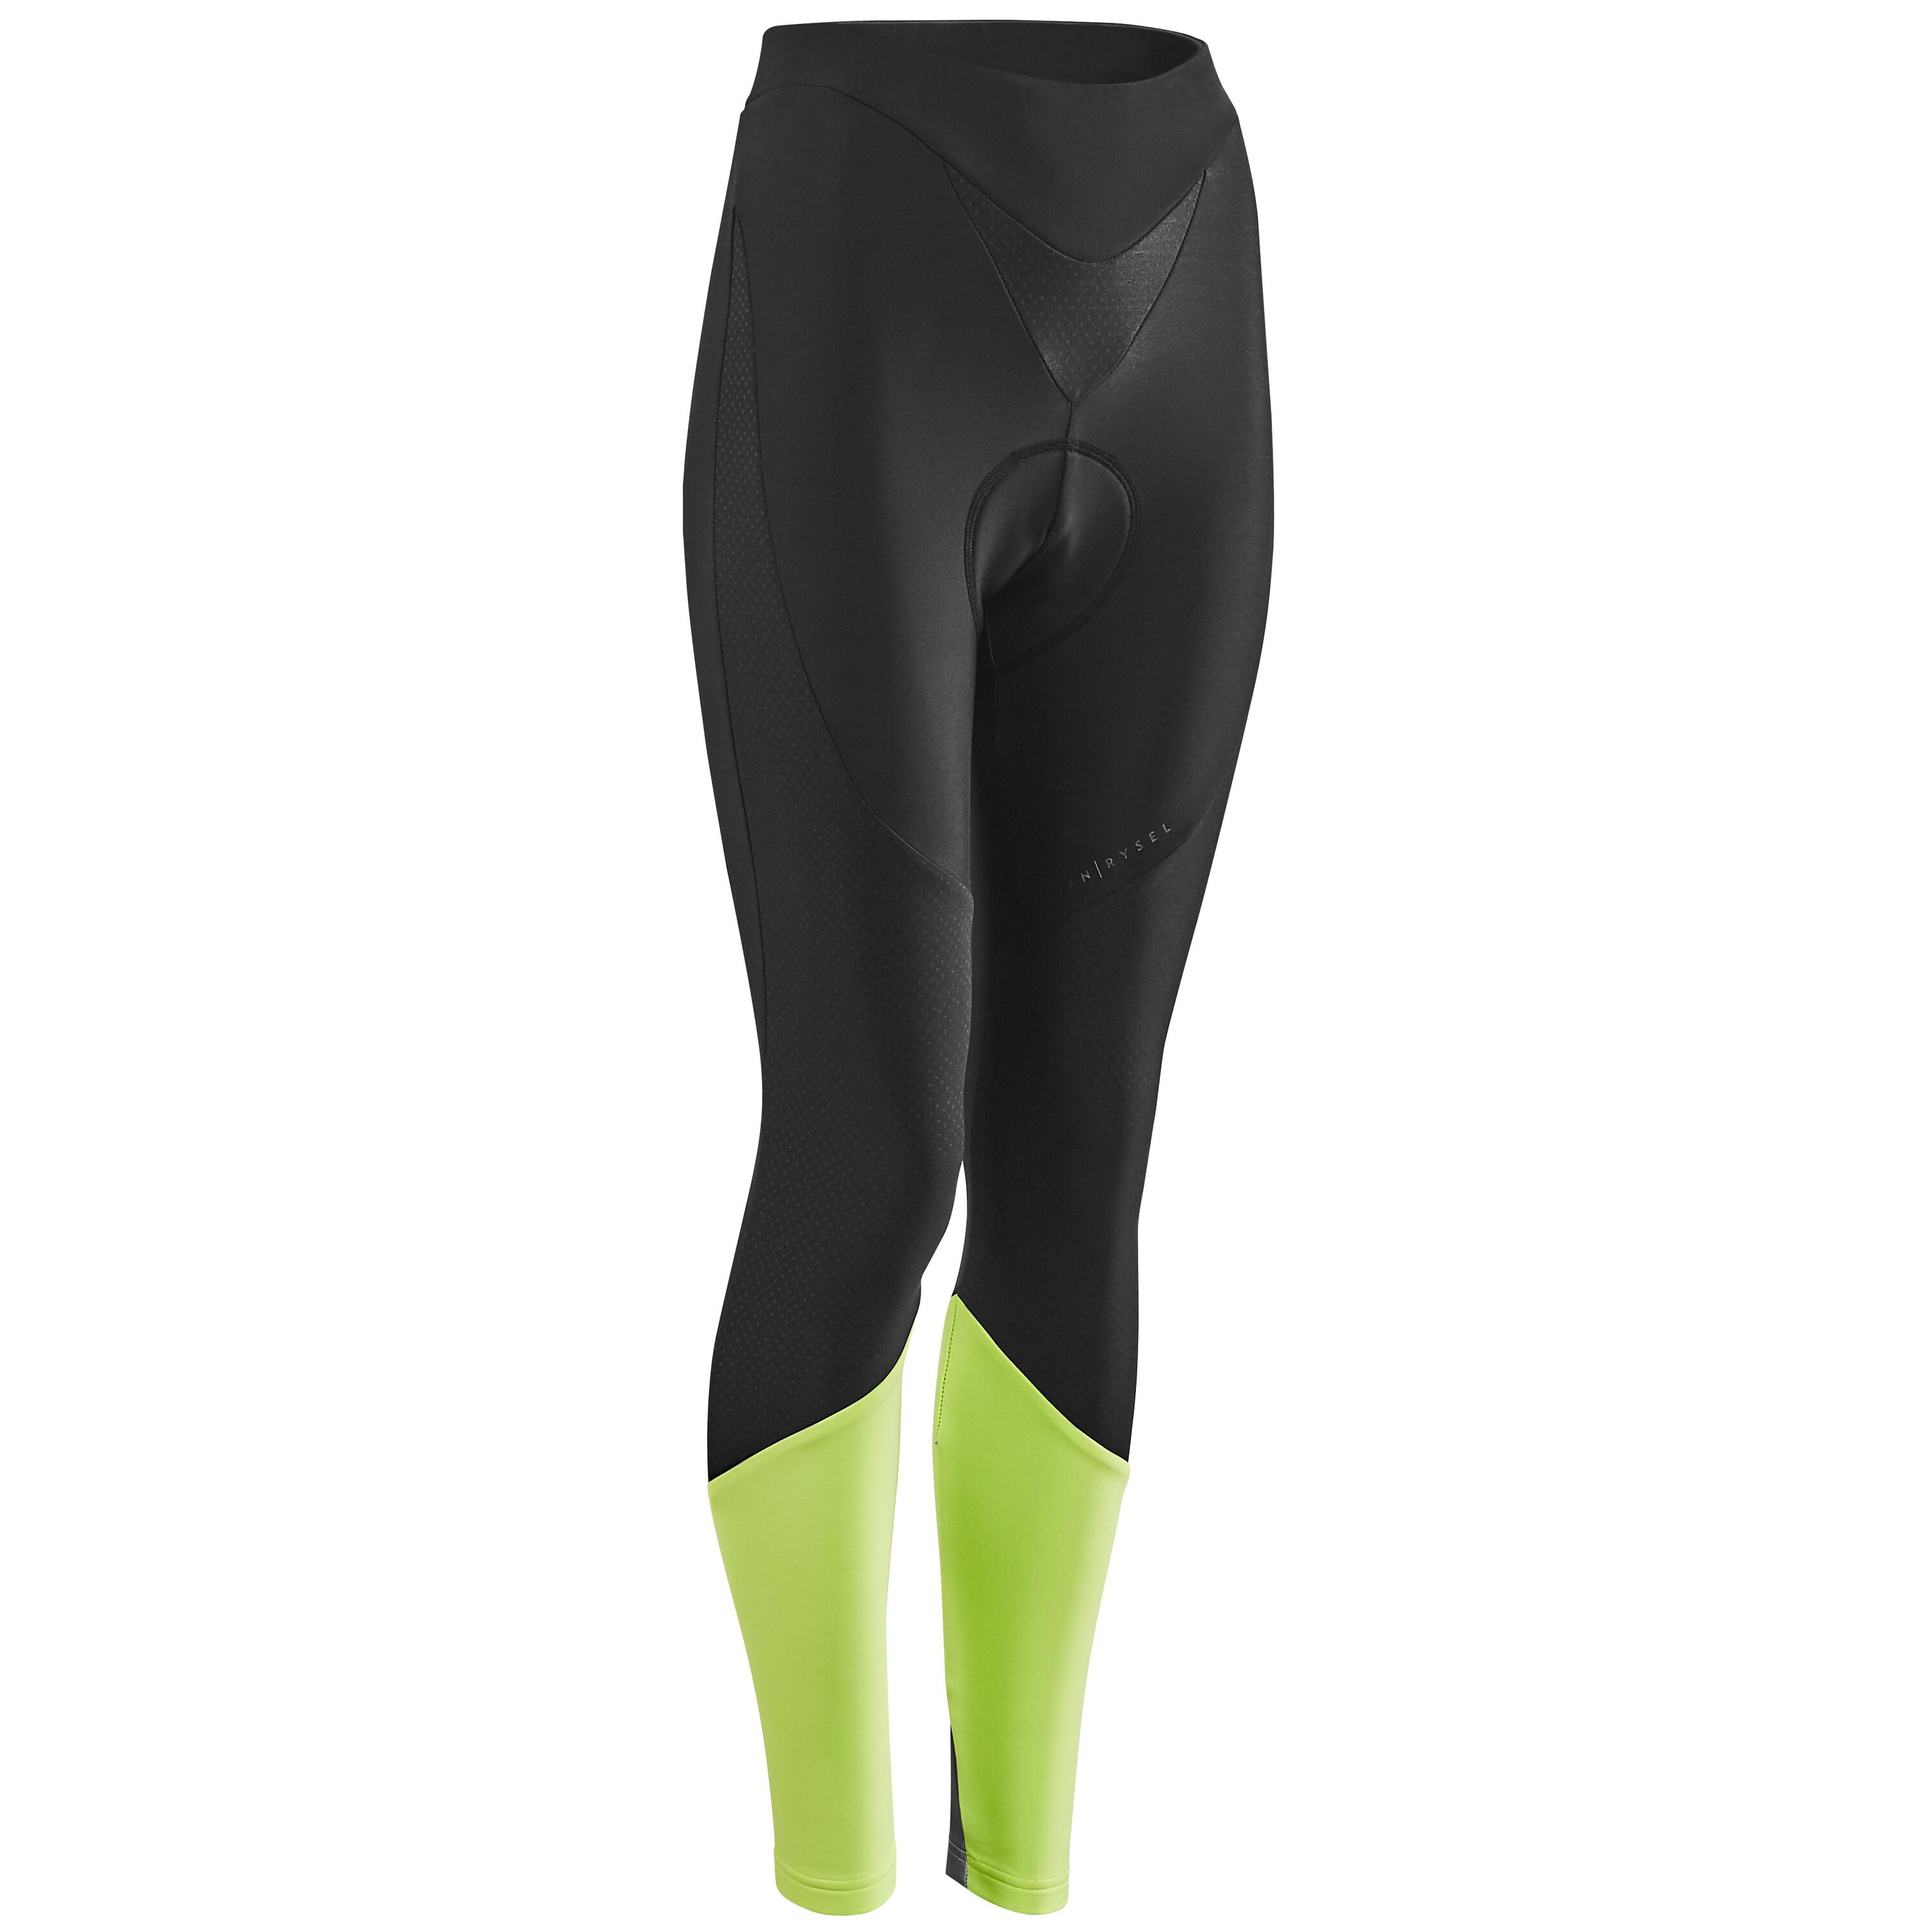 Women's Cycling Tights and Pants for sale